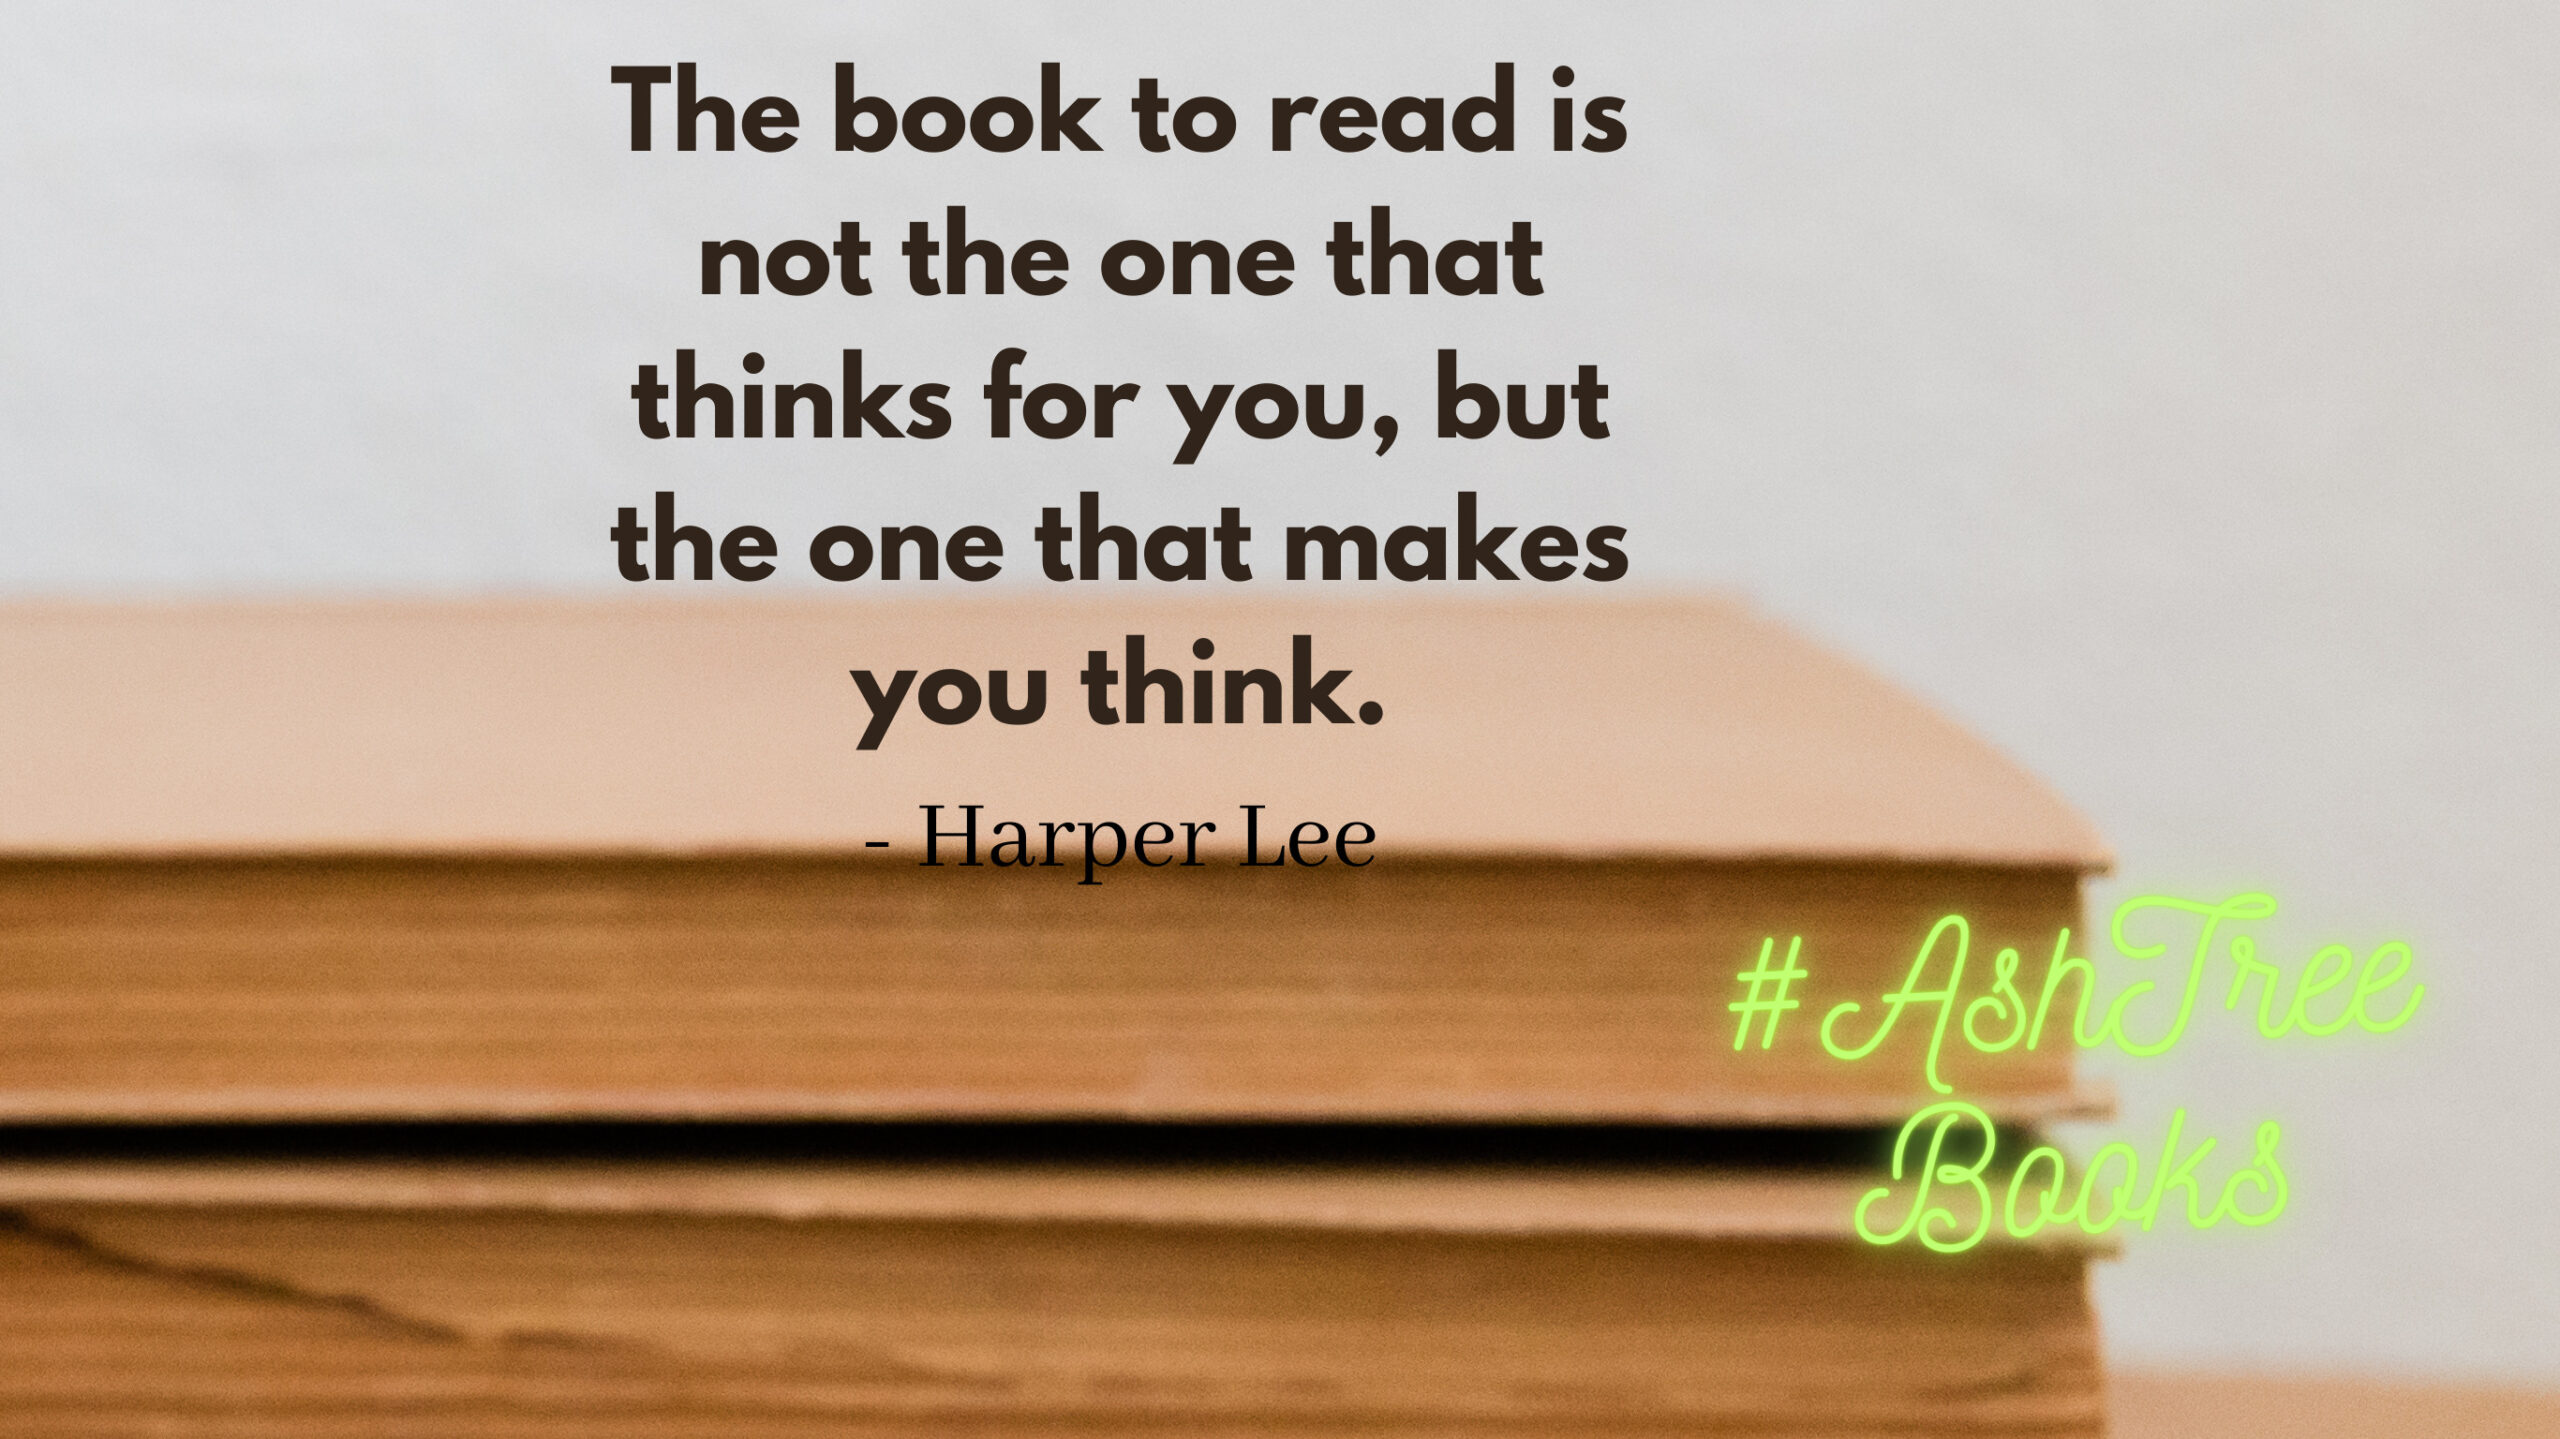 The book to read is not the one that thinks for you, but the one that makes you think - Harper Lee